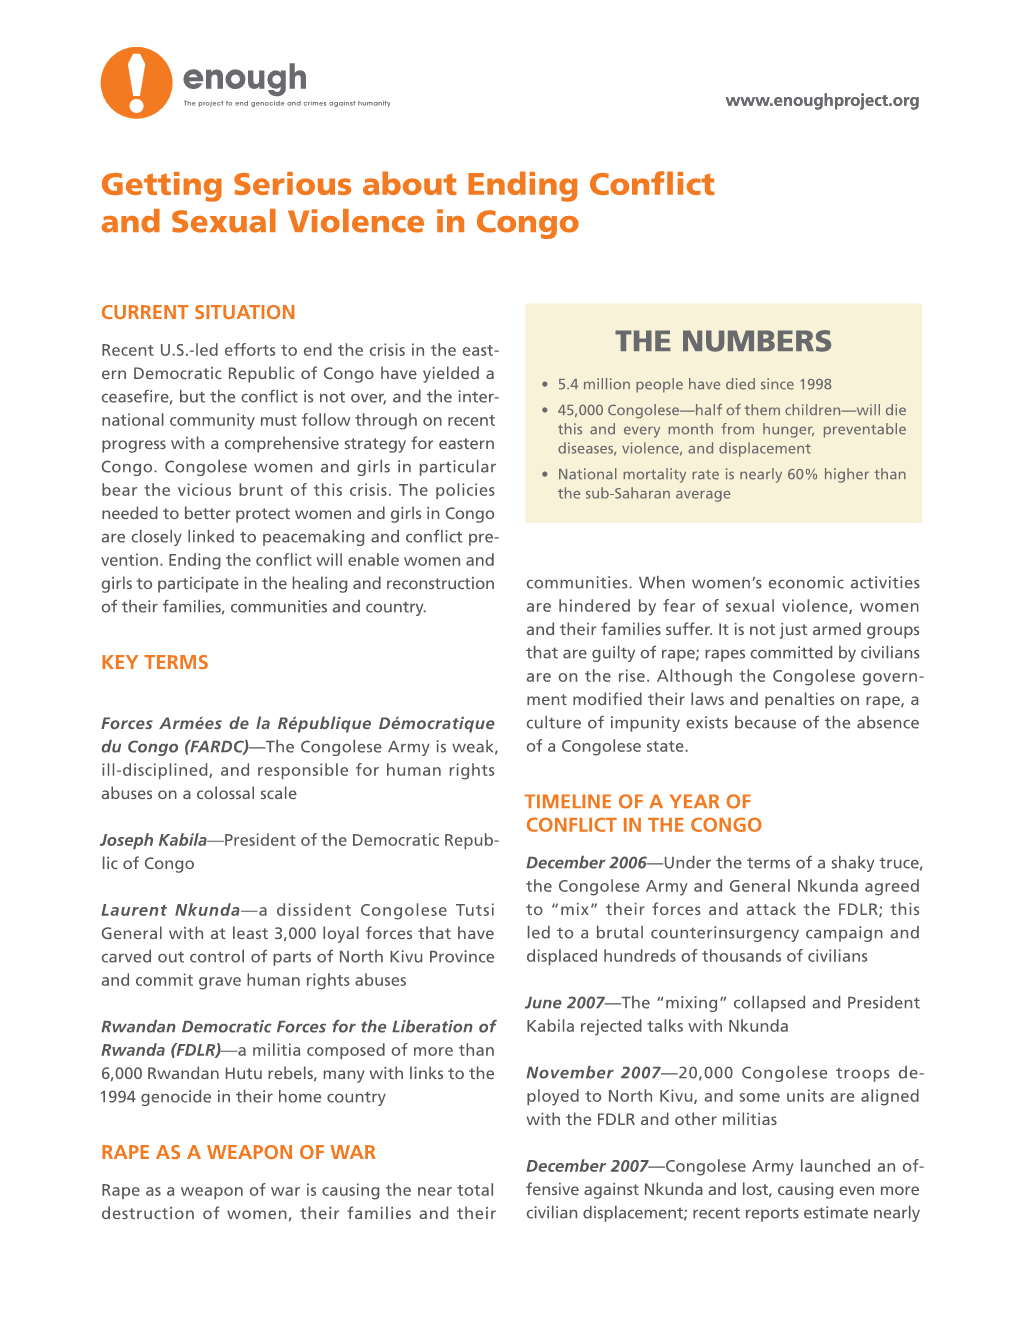 Getting Serious About Ending Conflict and Sexual Violence in Congo